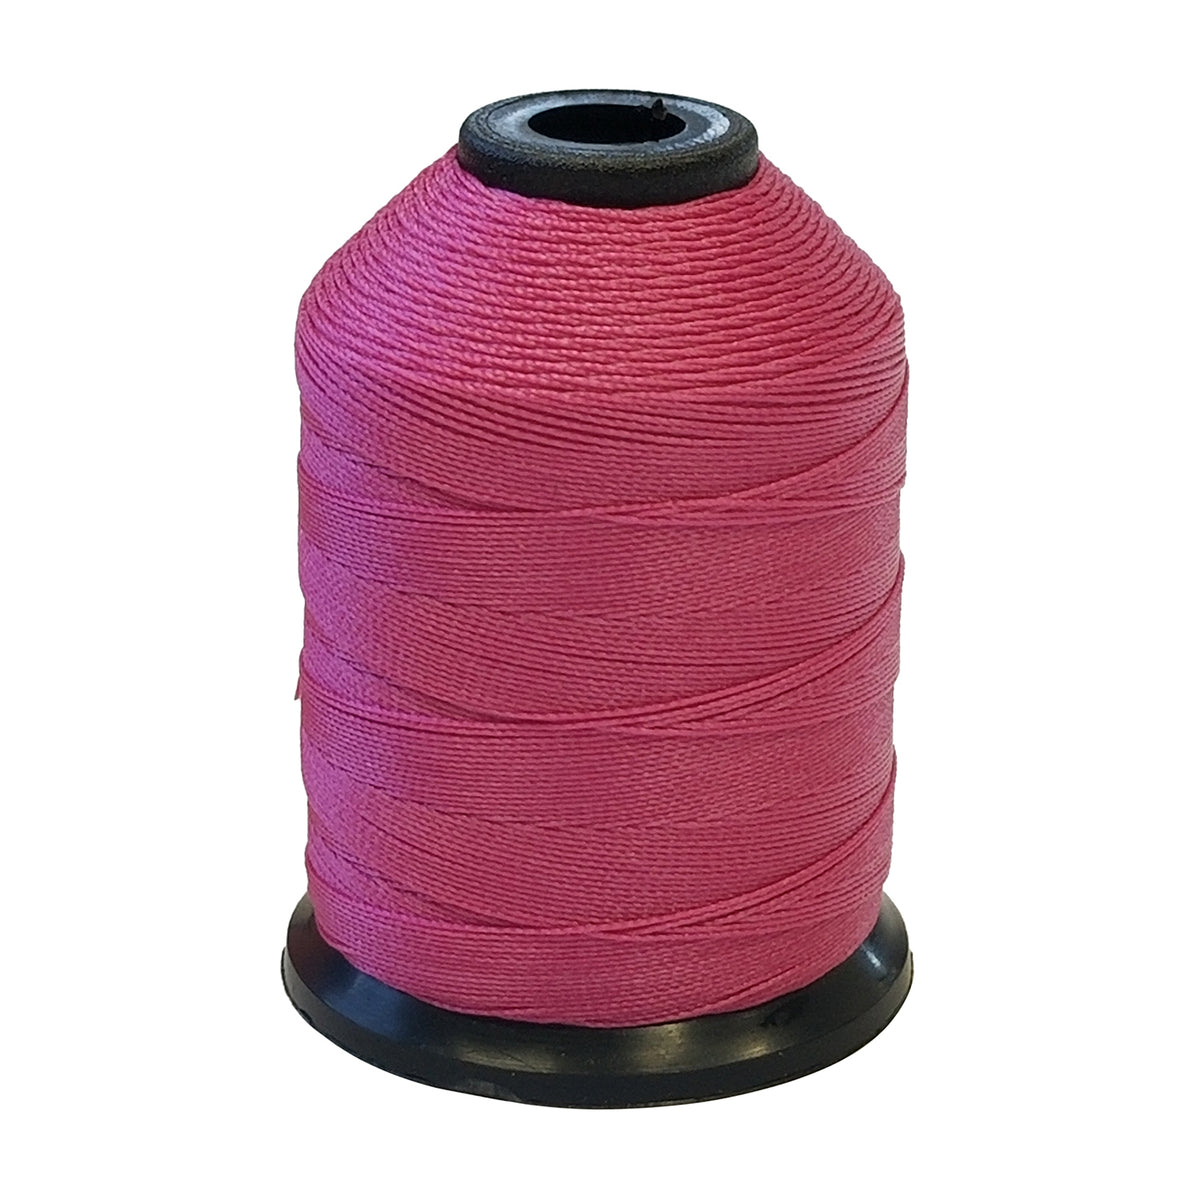 Bonded Nylon Upholstery Sewing Thread Size 69, Tex 70 - 1 Lb